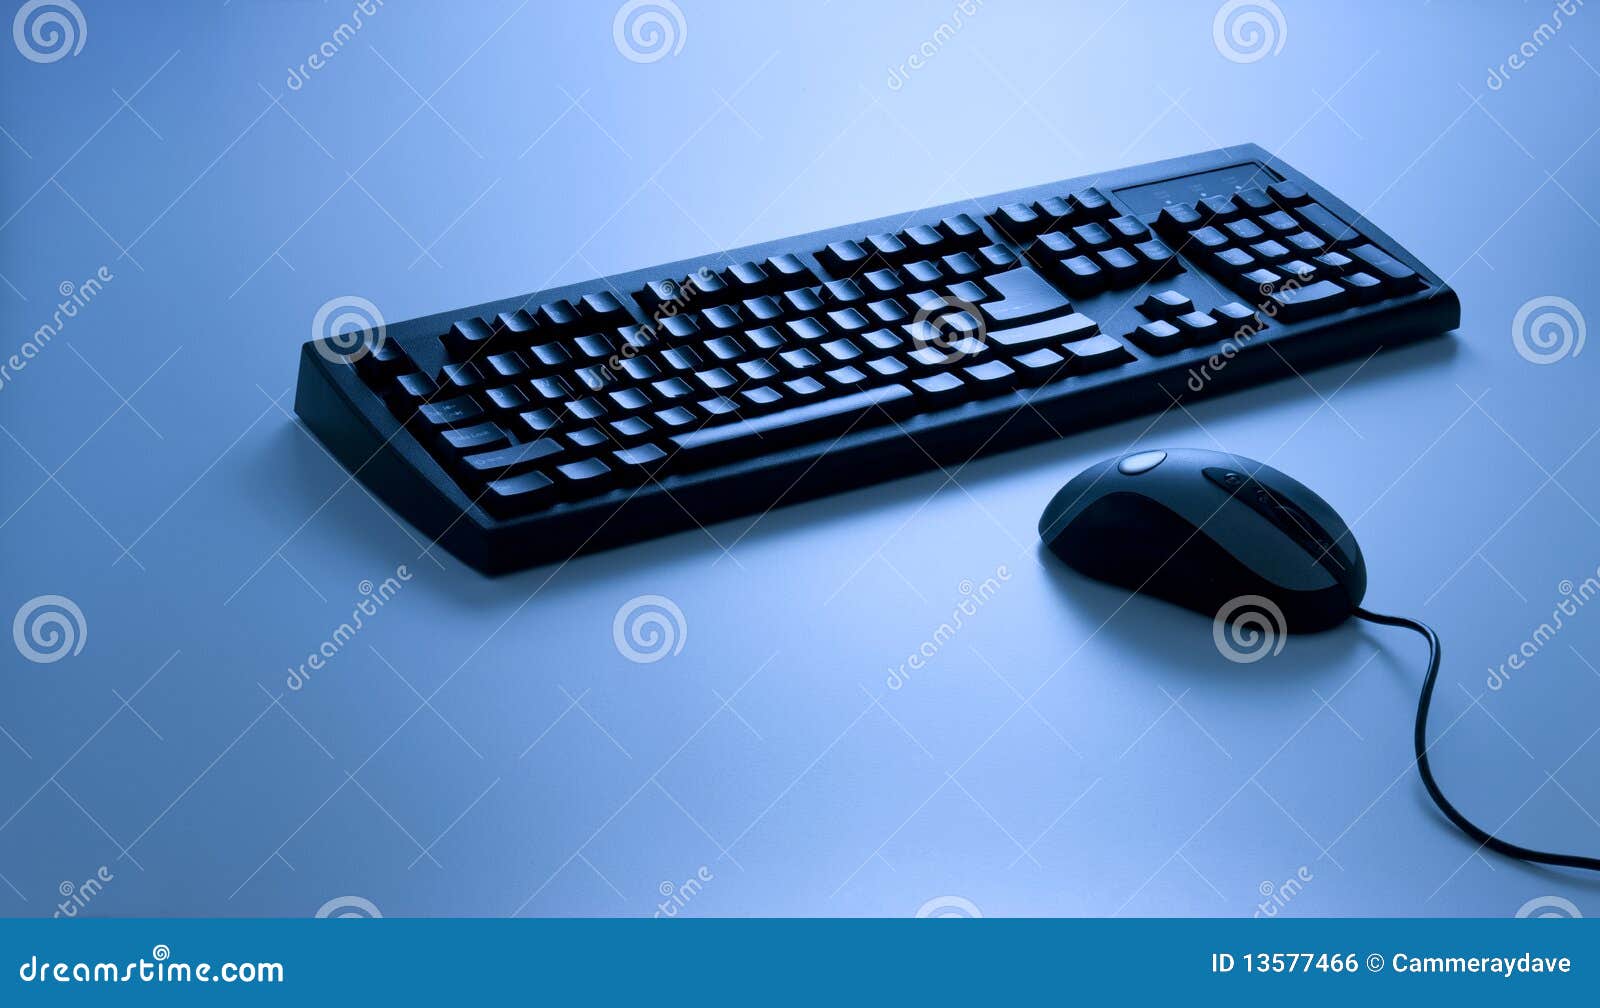 keyboard and mouse